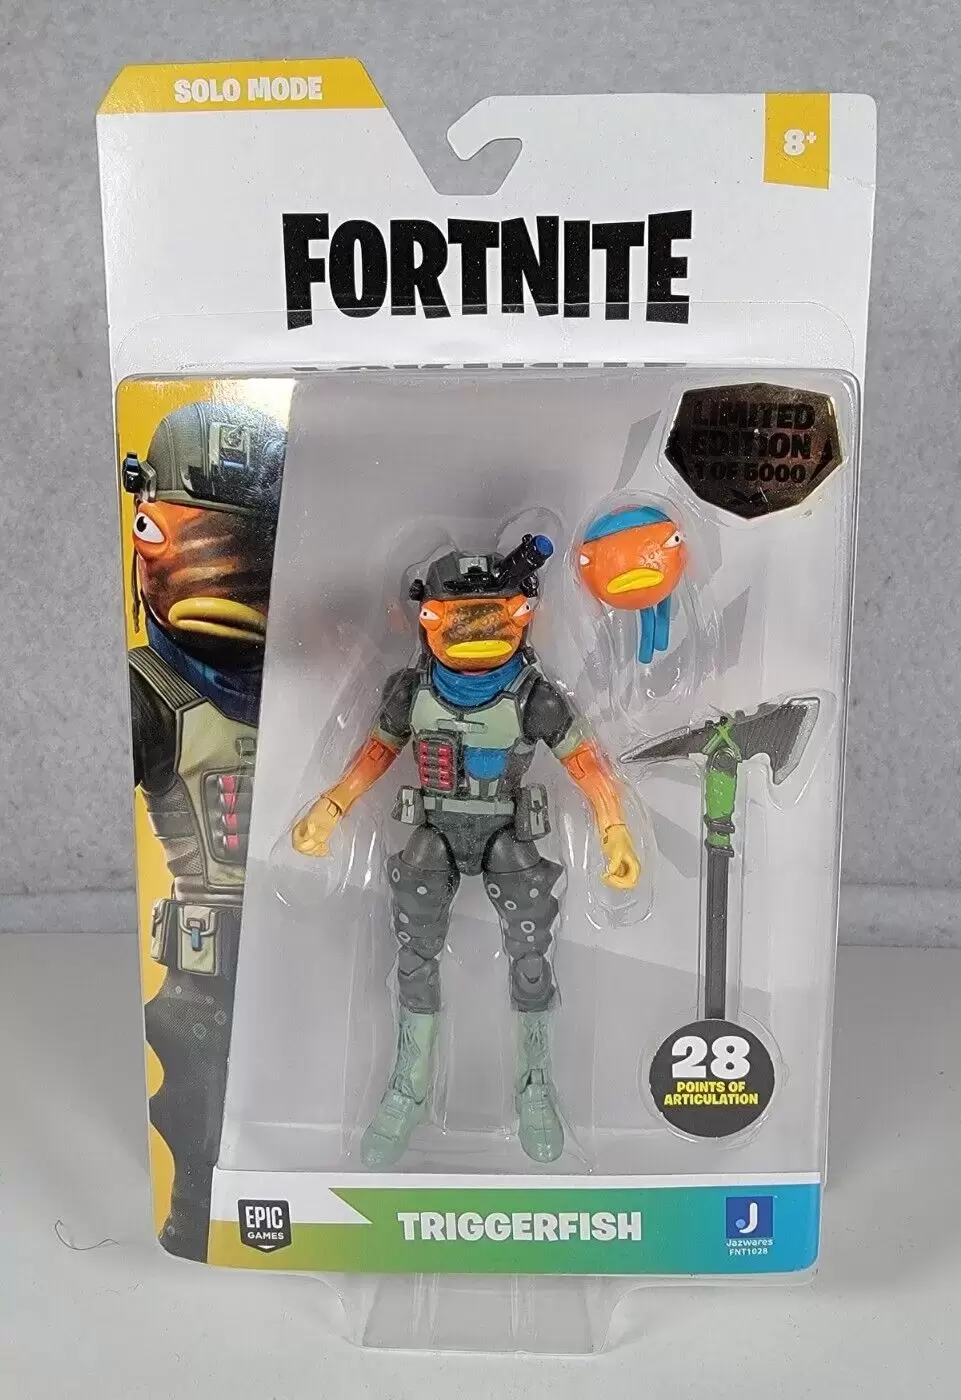 Fortnite JazWares - Triggerfish - Solo Mode - Limited Edition